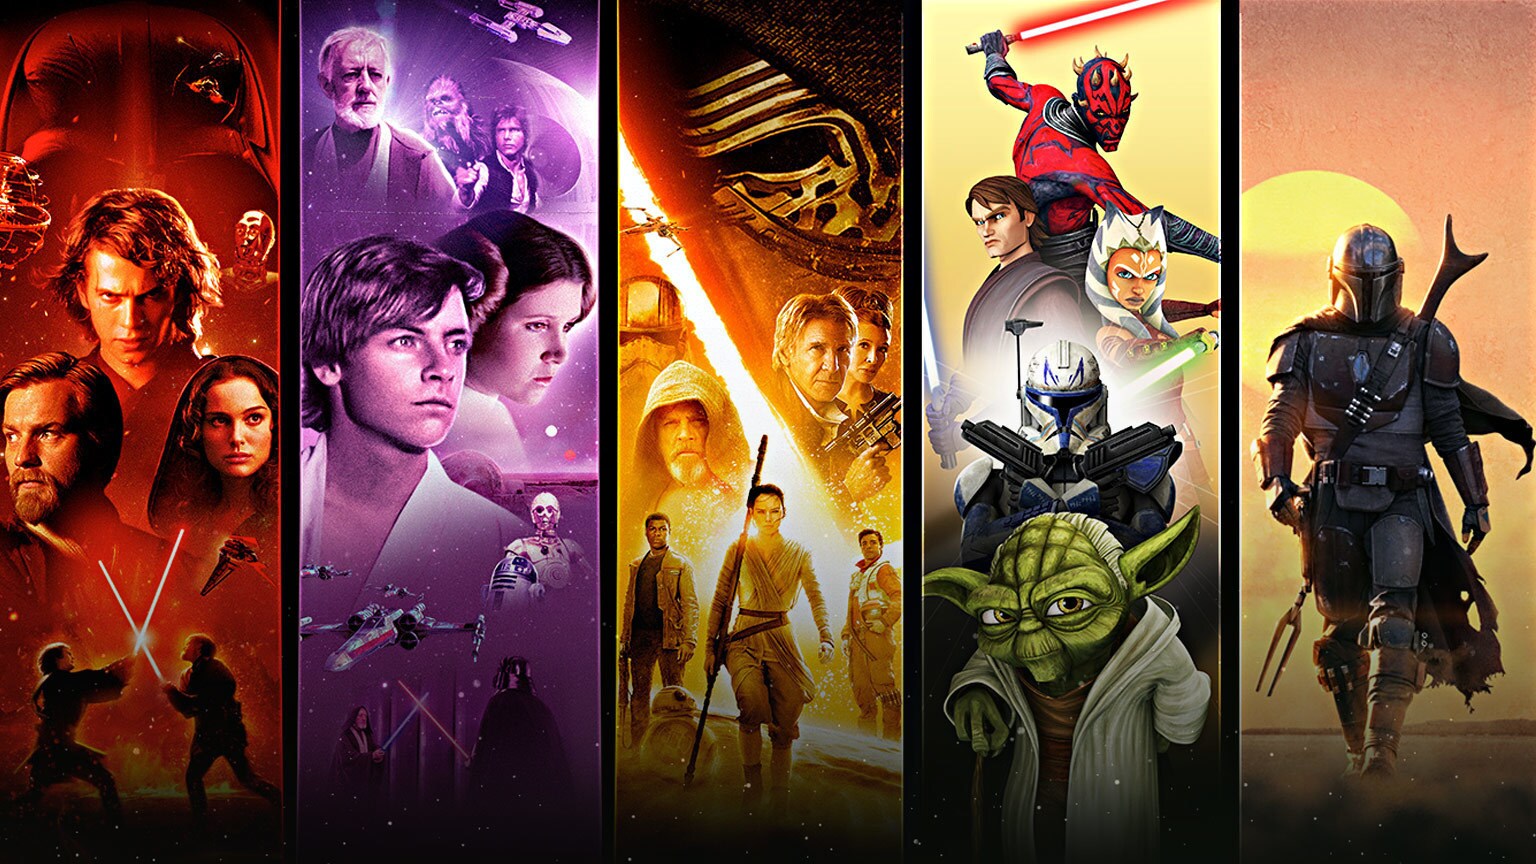 Poll: What Star Wars Content Are You Going to Watch First on Disney+?